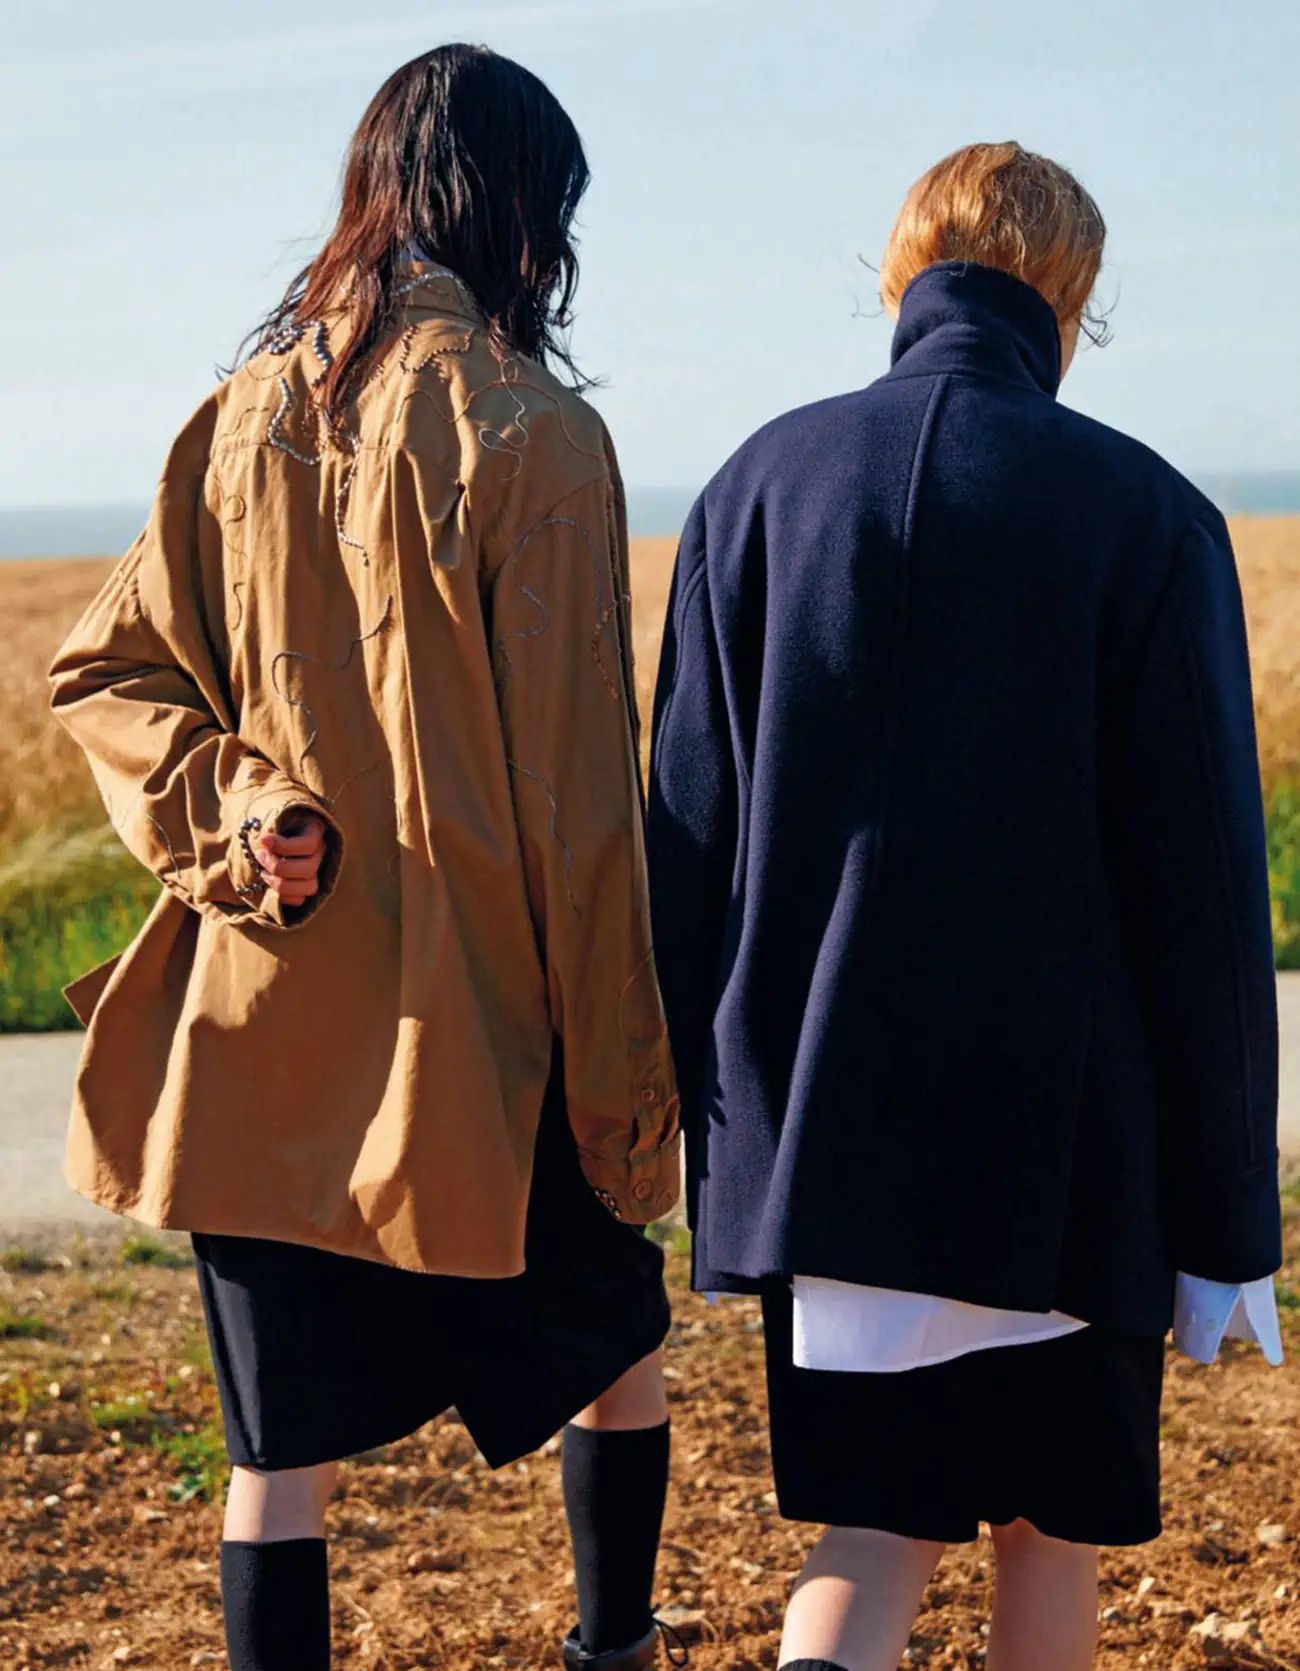 Arina Lush and Lee Ju Hyeok by Romain Sellier for Madame Figaro September 15th, 2023